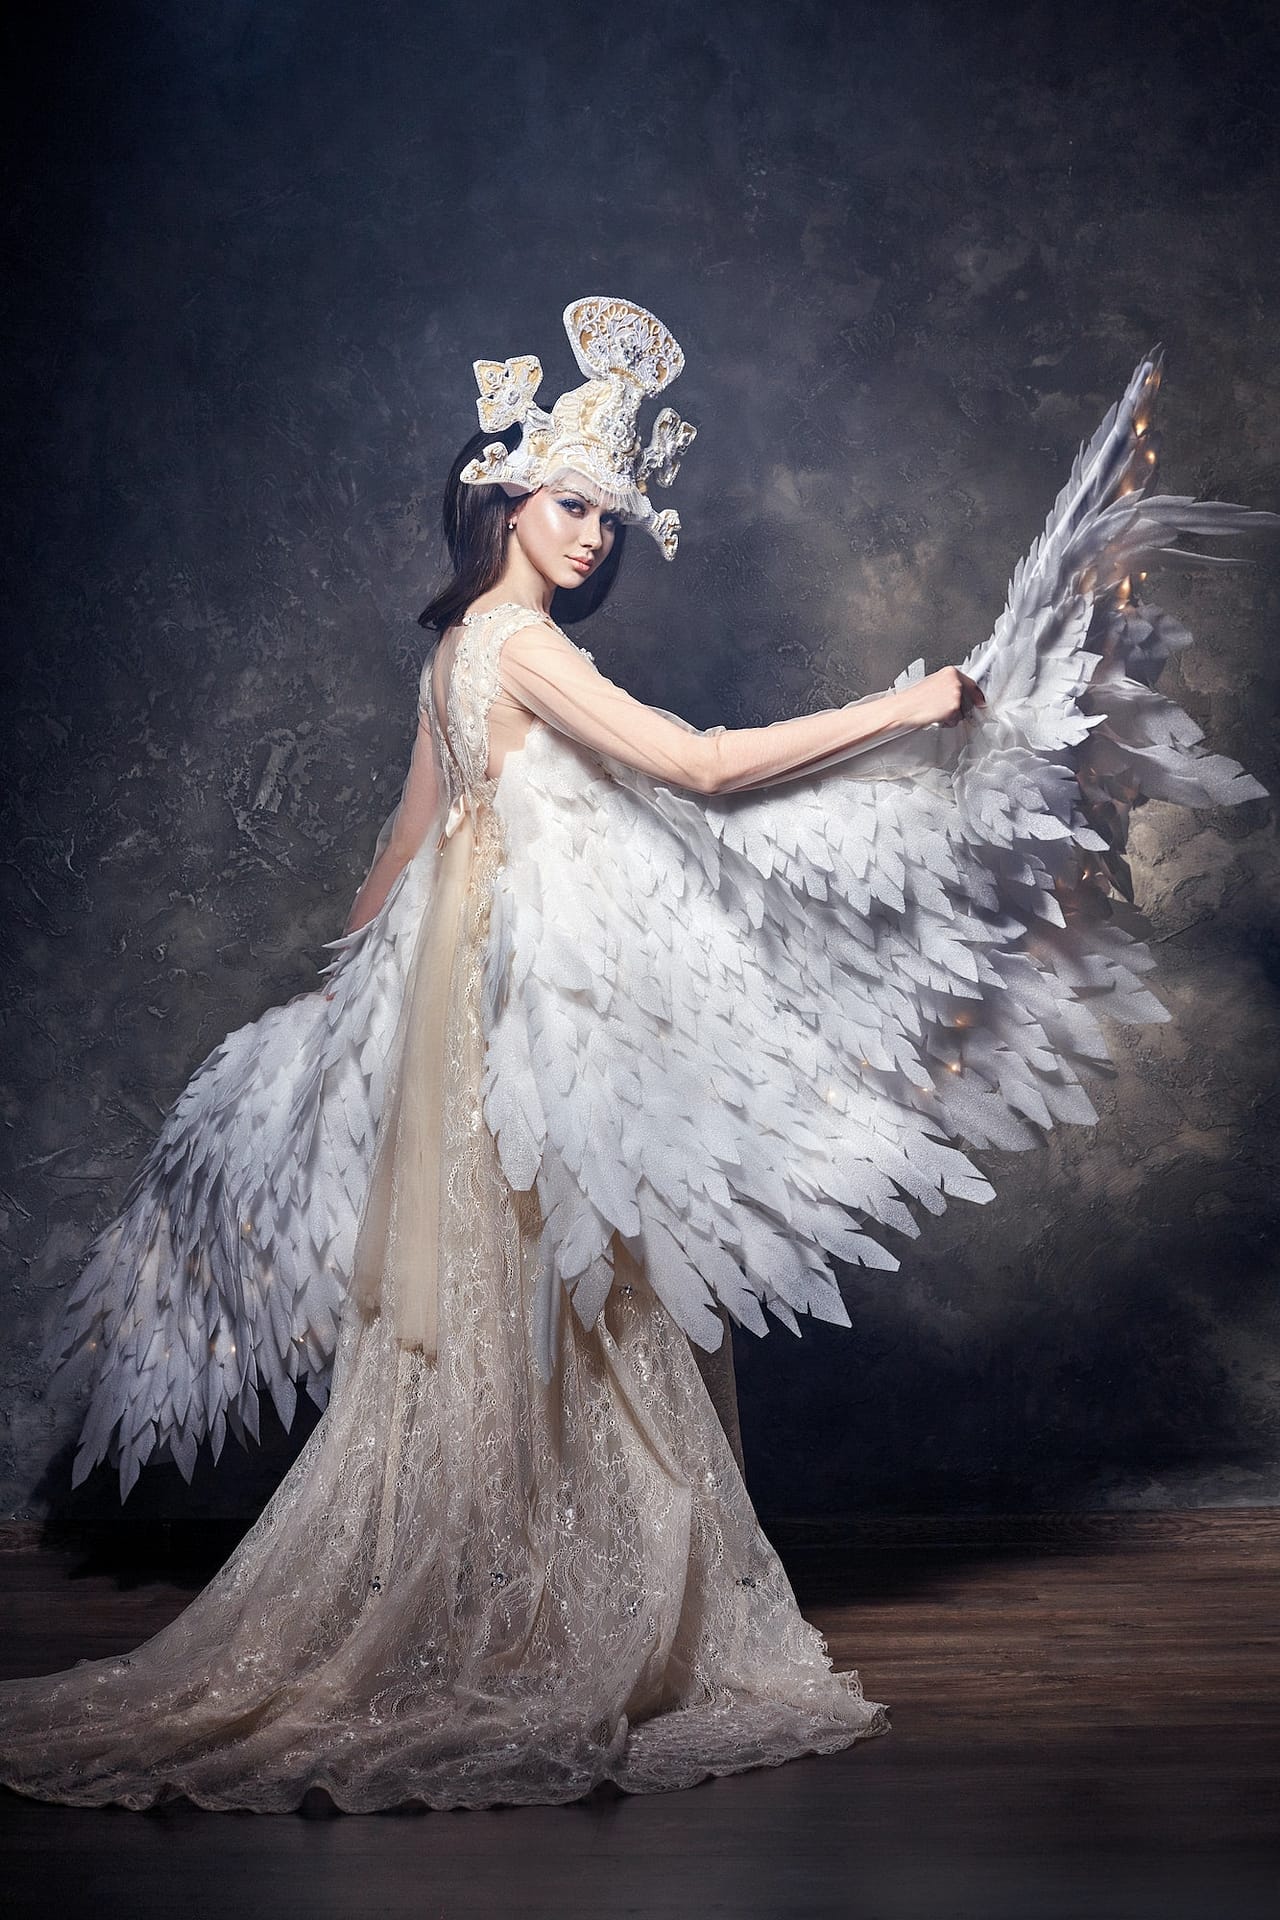 Art angel girl with wings fairy image. Swan Princess, Queen of angels. Lovely dress with wings